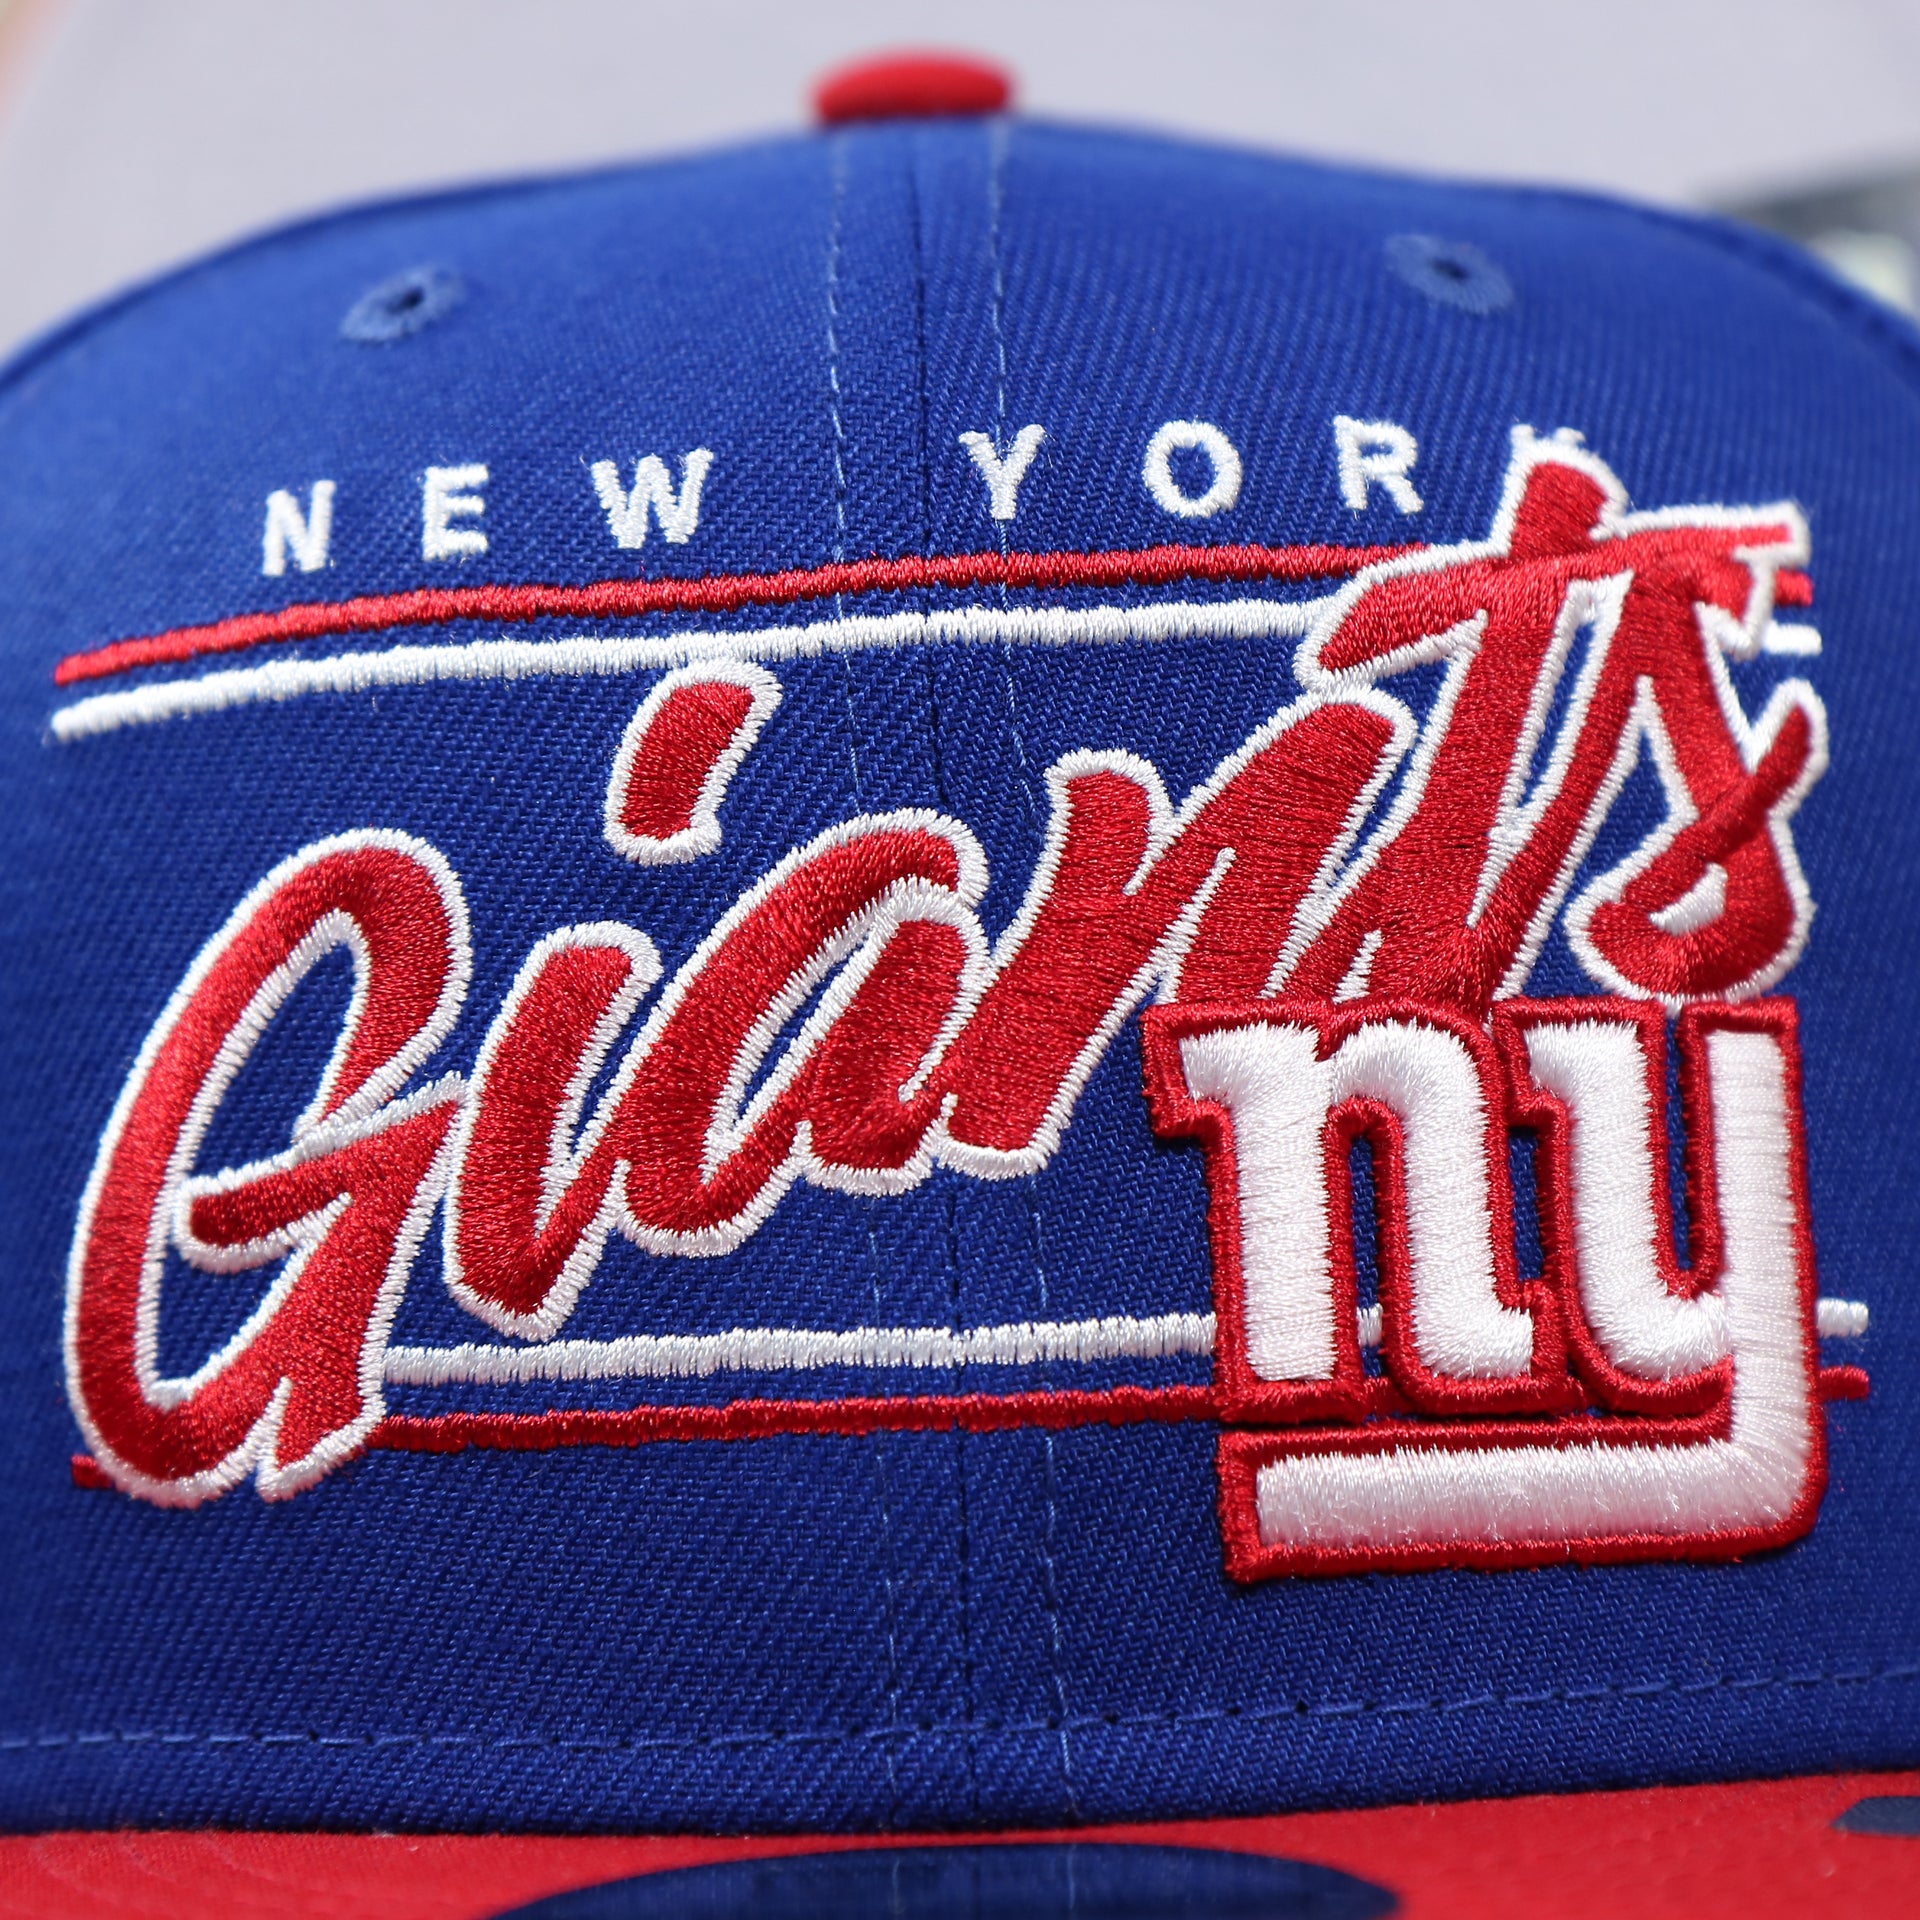 The New York Giants Team Script on the New York Giants Team Script Gray Bottom 9Fifty Snapback | Royal Blue And Red Snap Cap